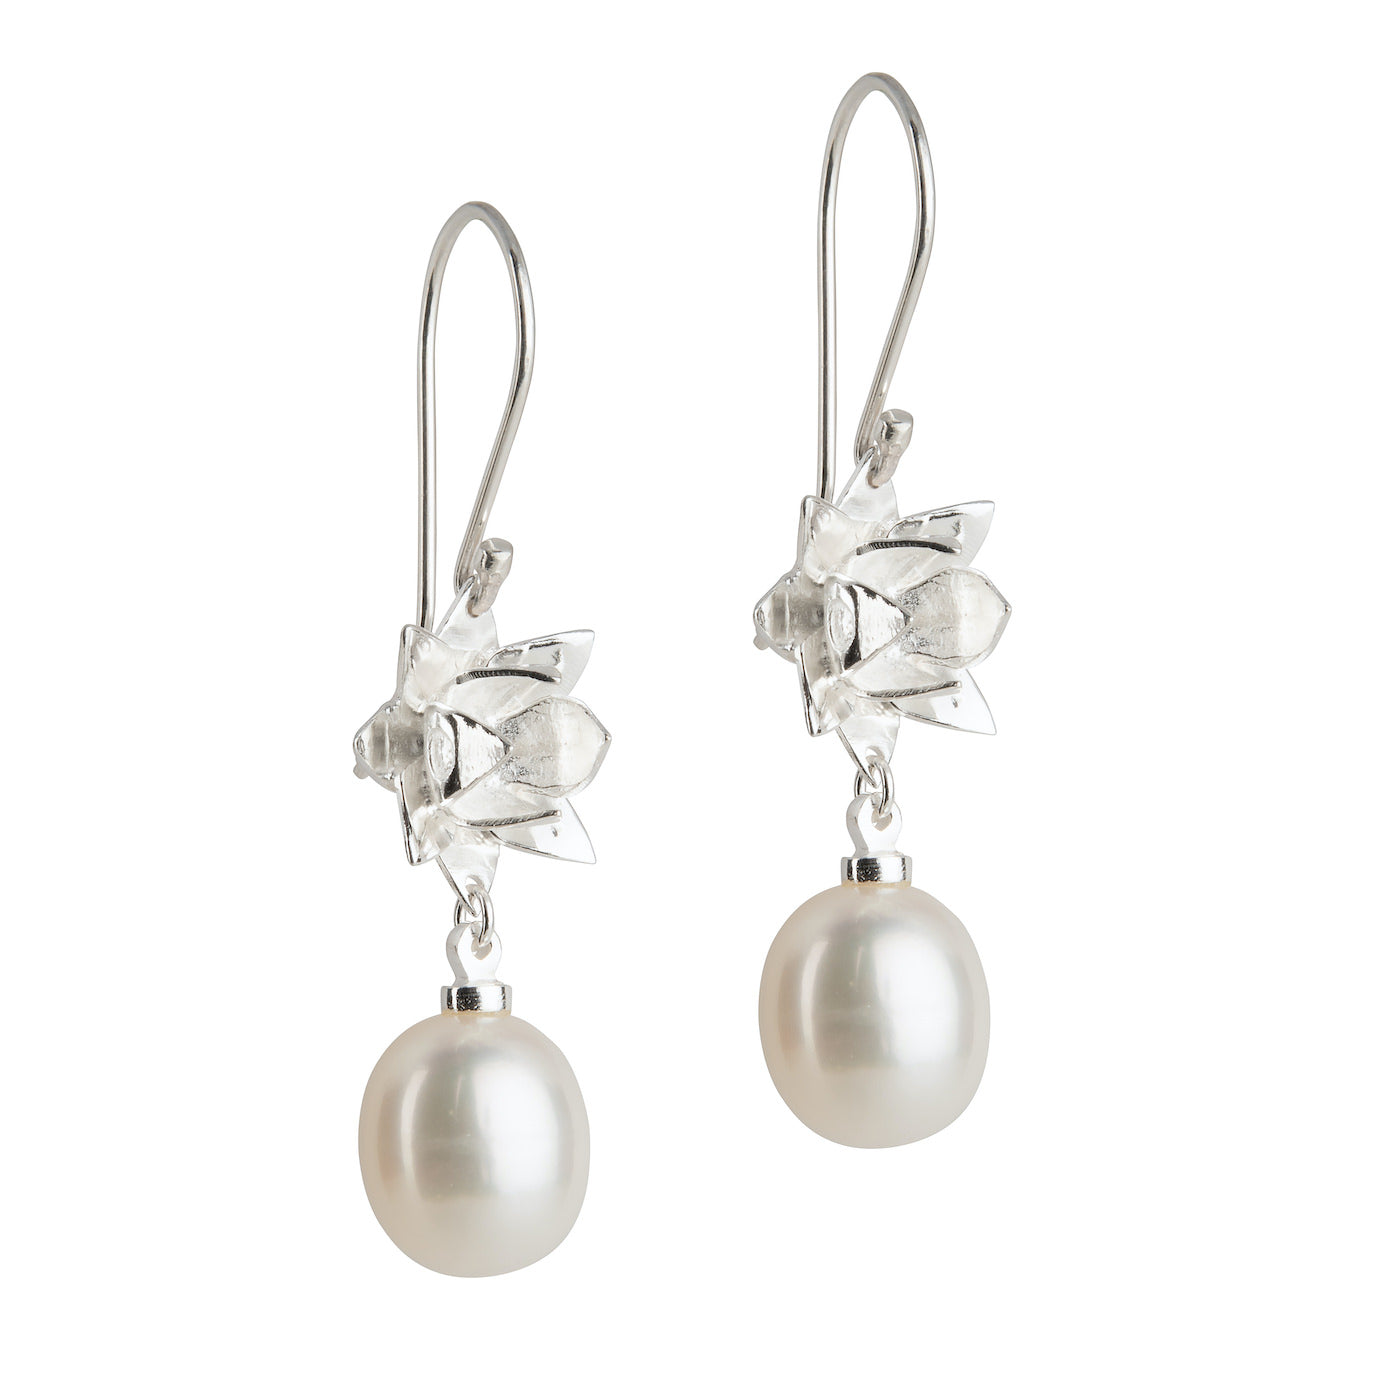 Front view of Lotus Pearl hook earrings in sterling silver on white background